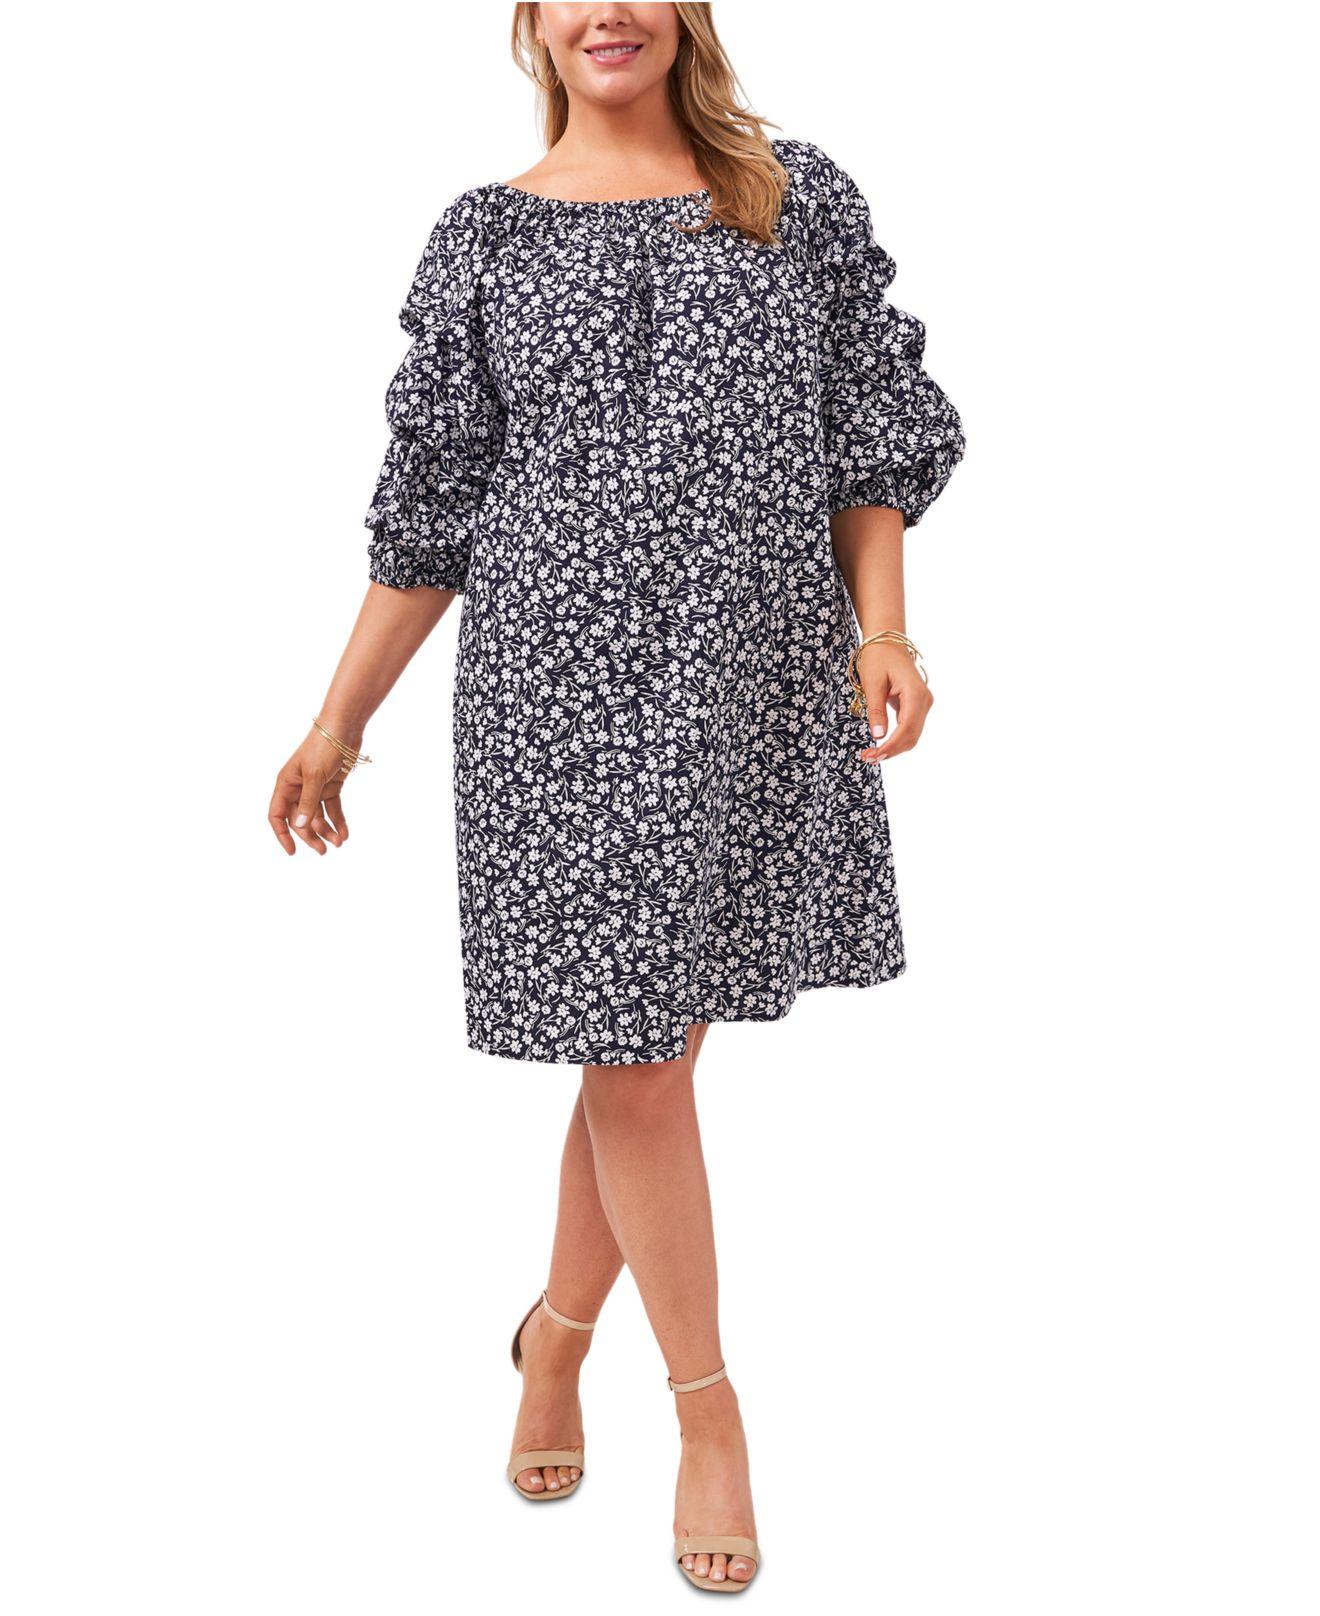 Msk Plus Size Cotton 3/4-sleeve Printed Dress in Blue | Lyst